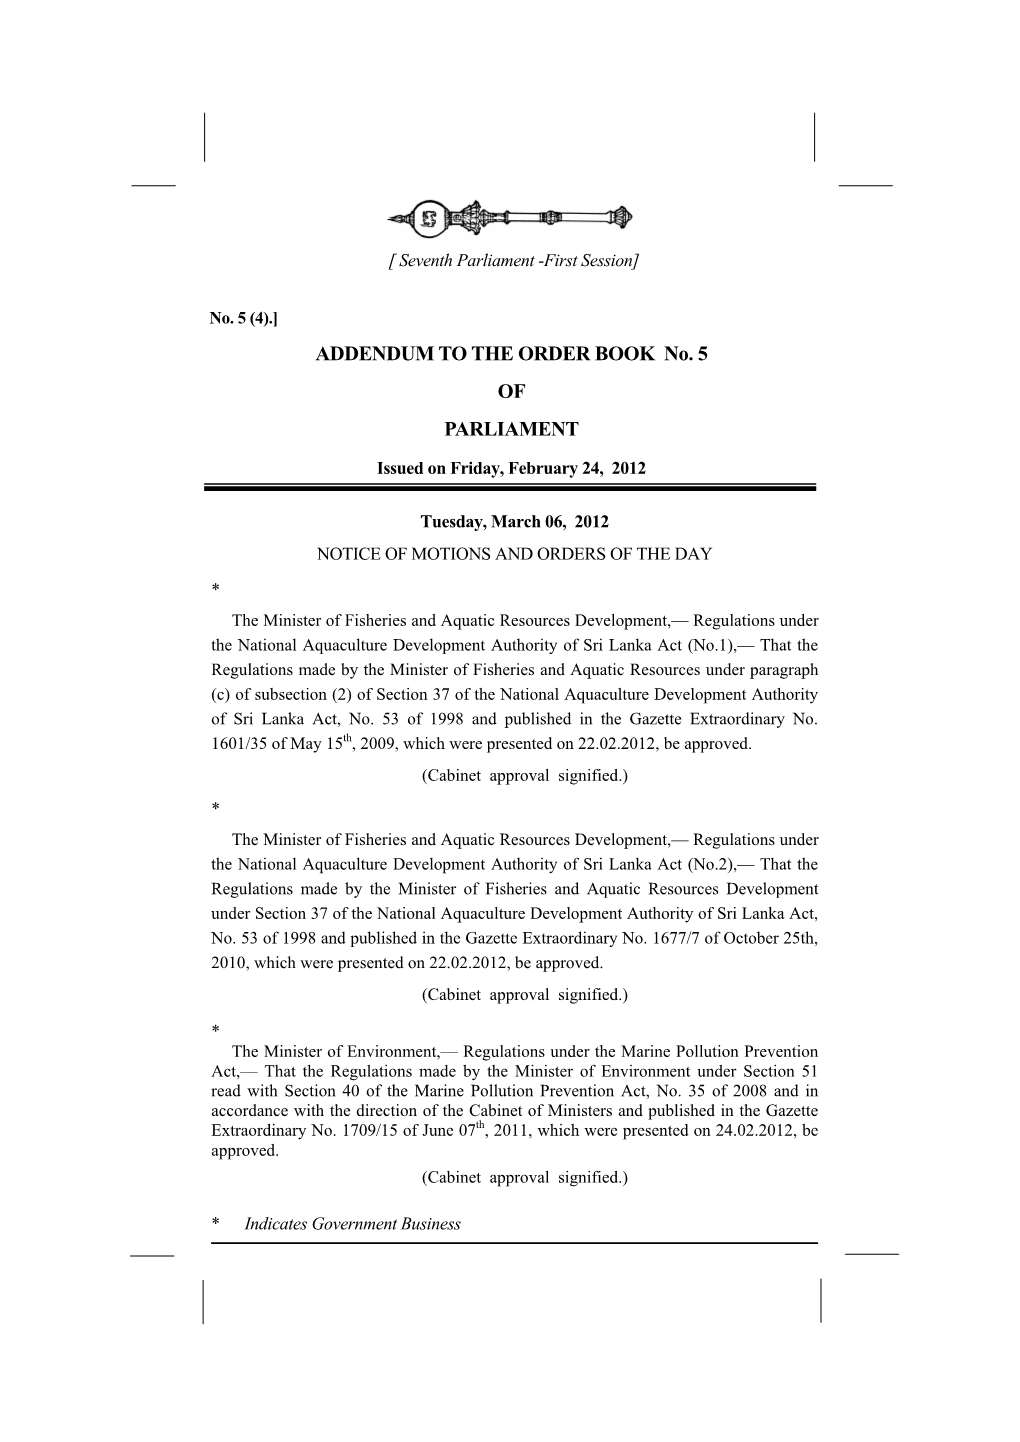 ADDENDUM to the ORDER BOOK No. 5 of PARLIAMENT